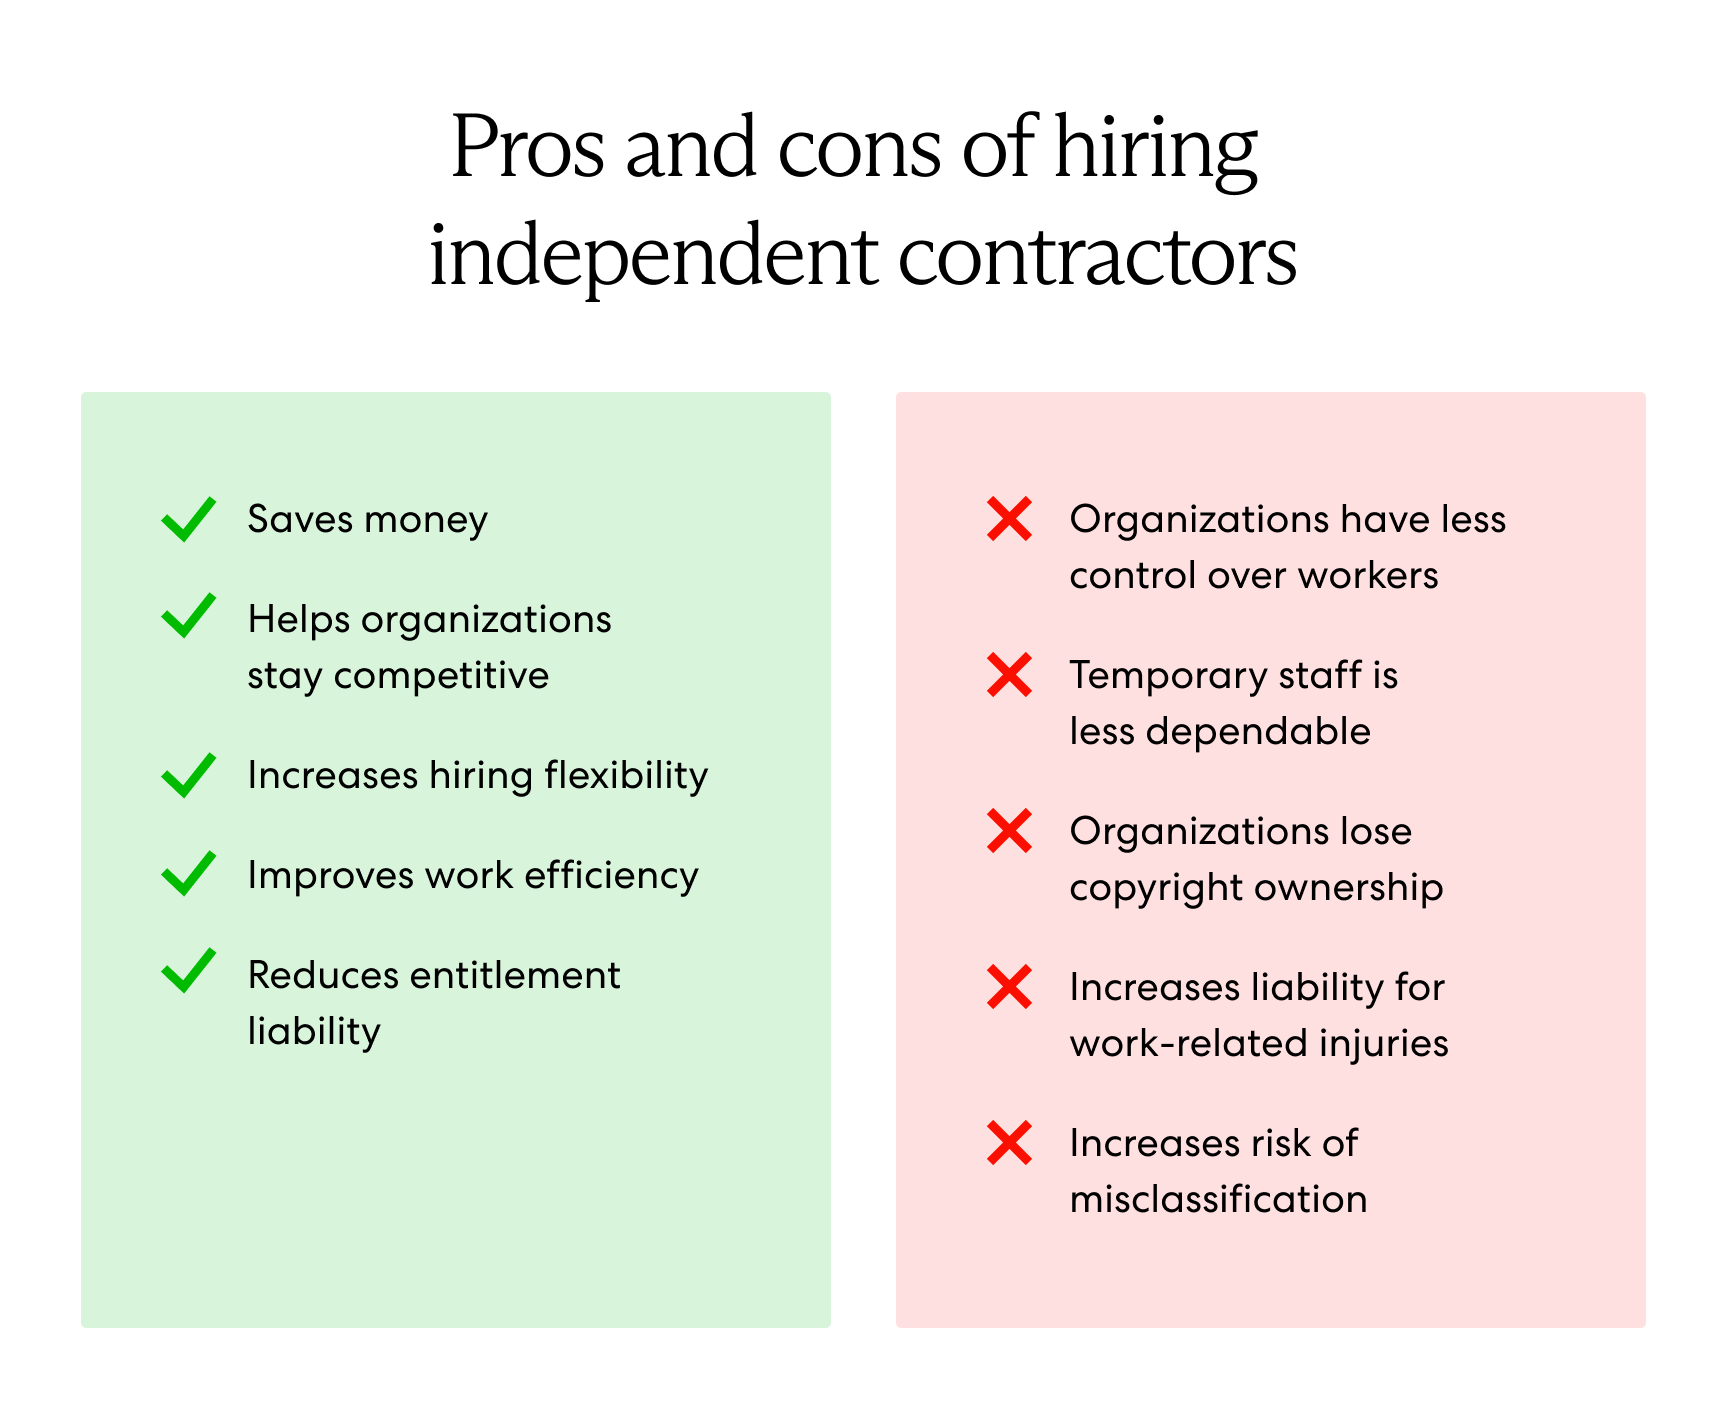 Hiring independent contractors offers pros to global organizations, such as cost savings, but also presents cons like misclassification risks